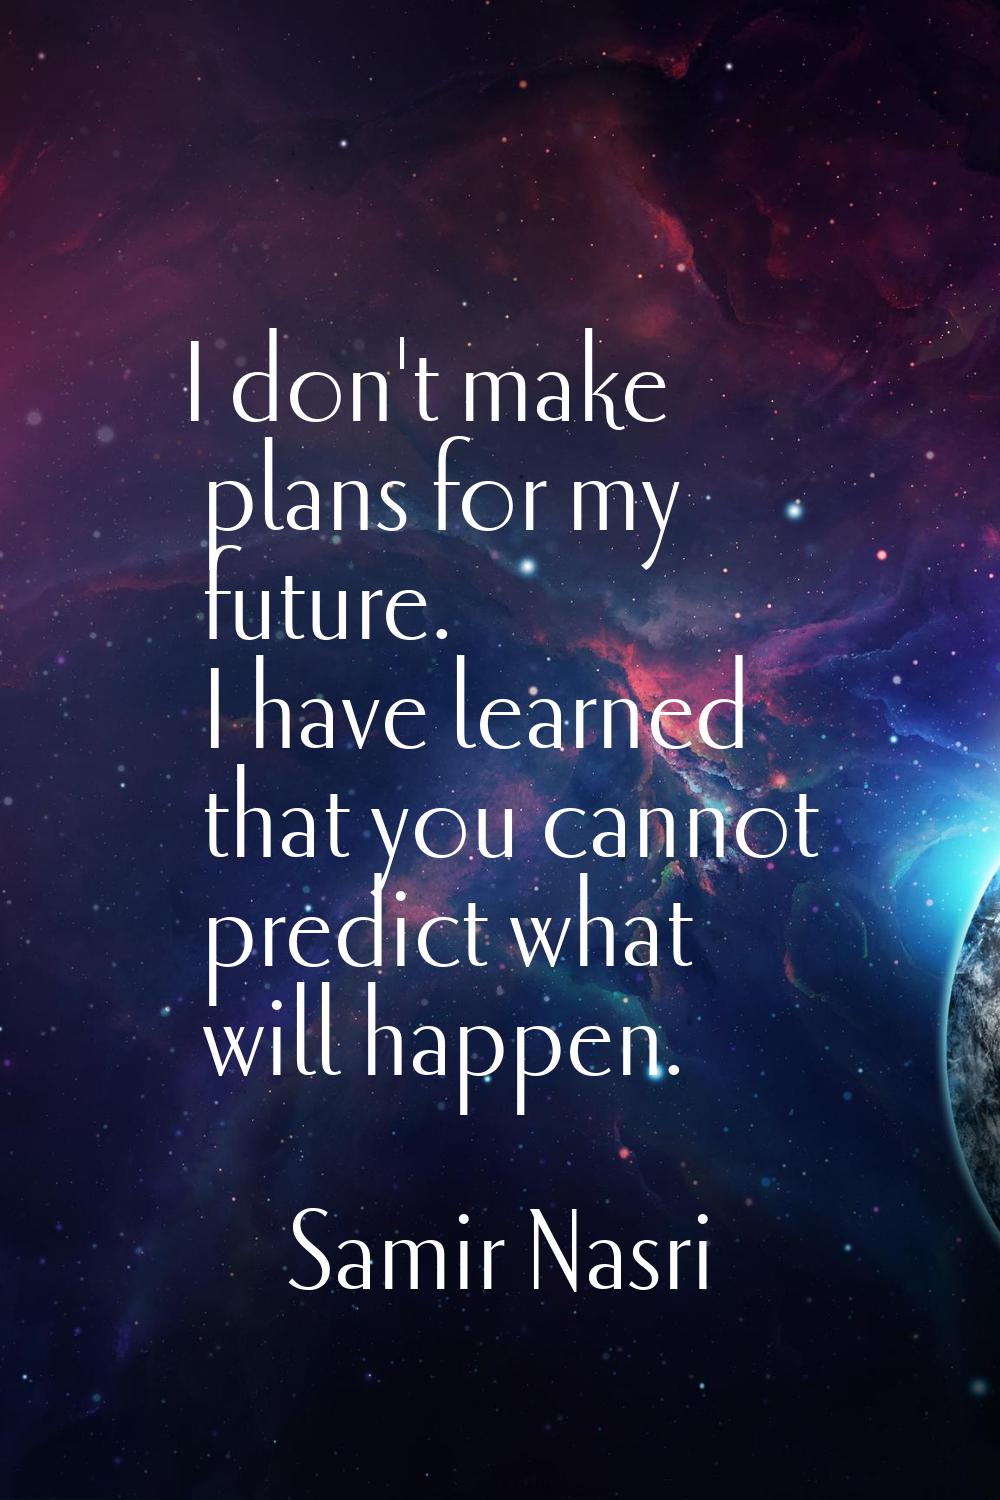 I don't make plans for my future. I have learned that you cannot predict what will happen.